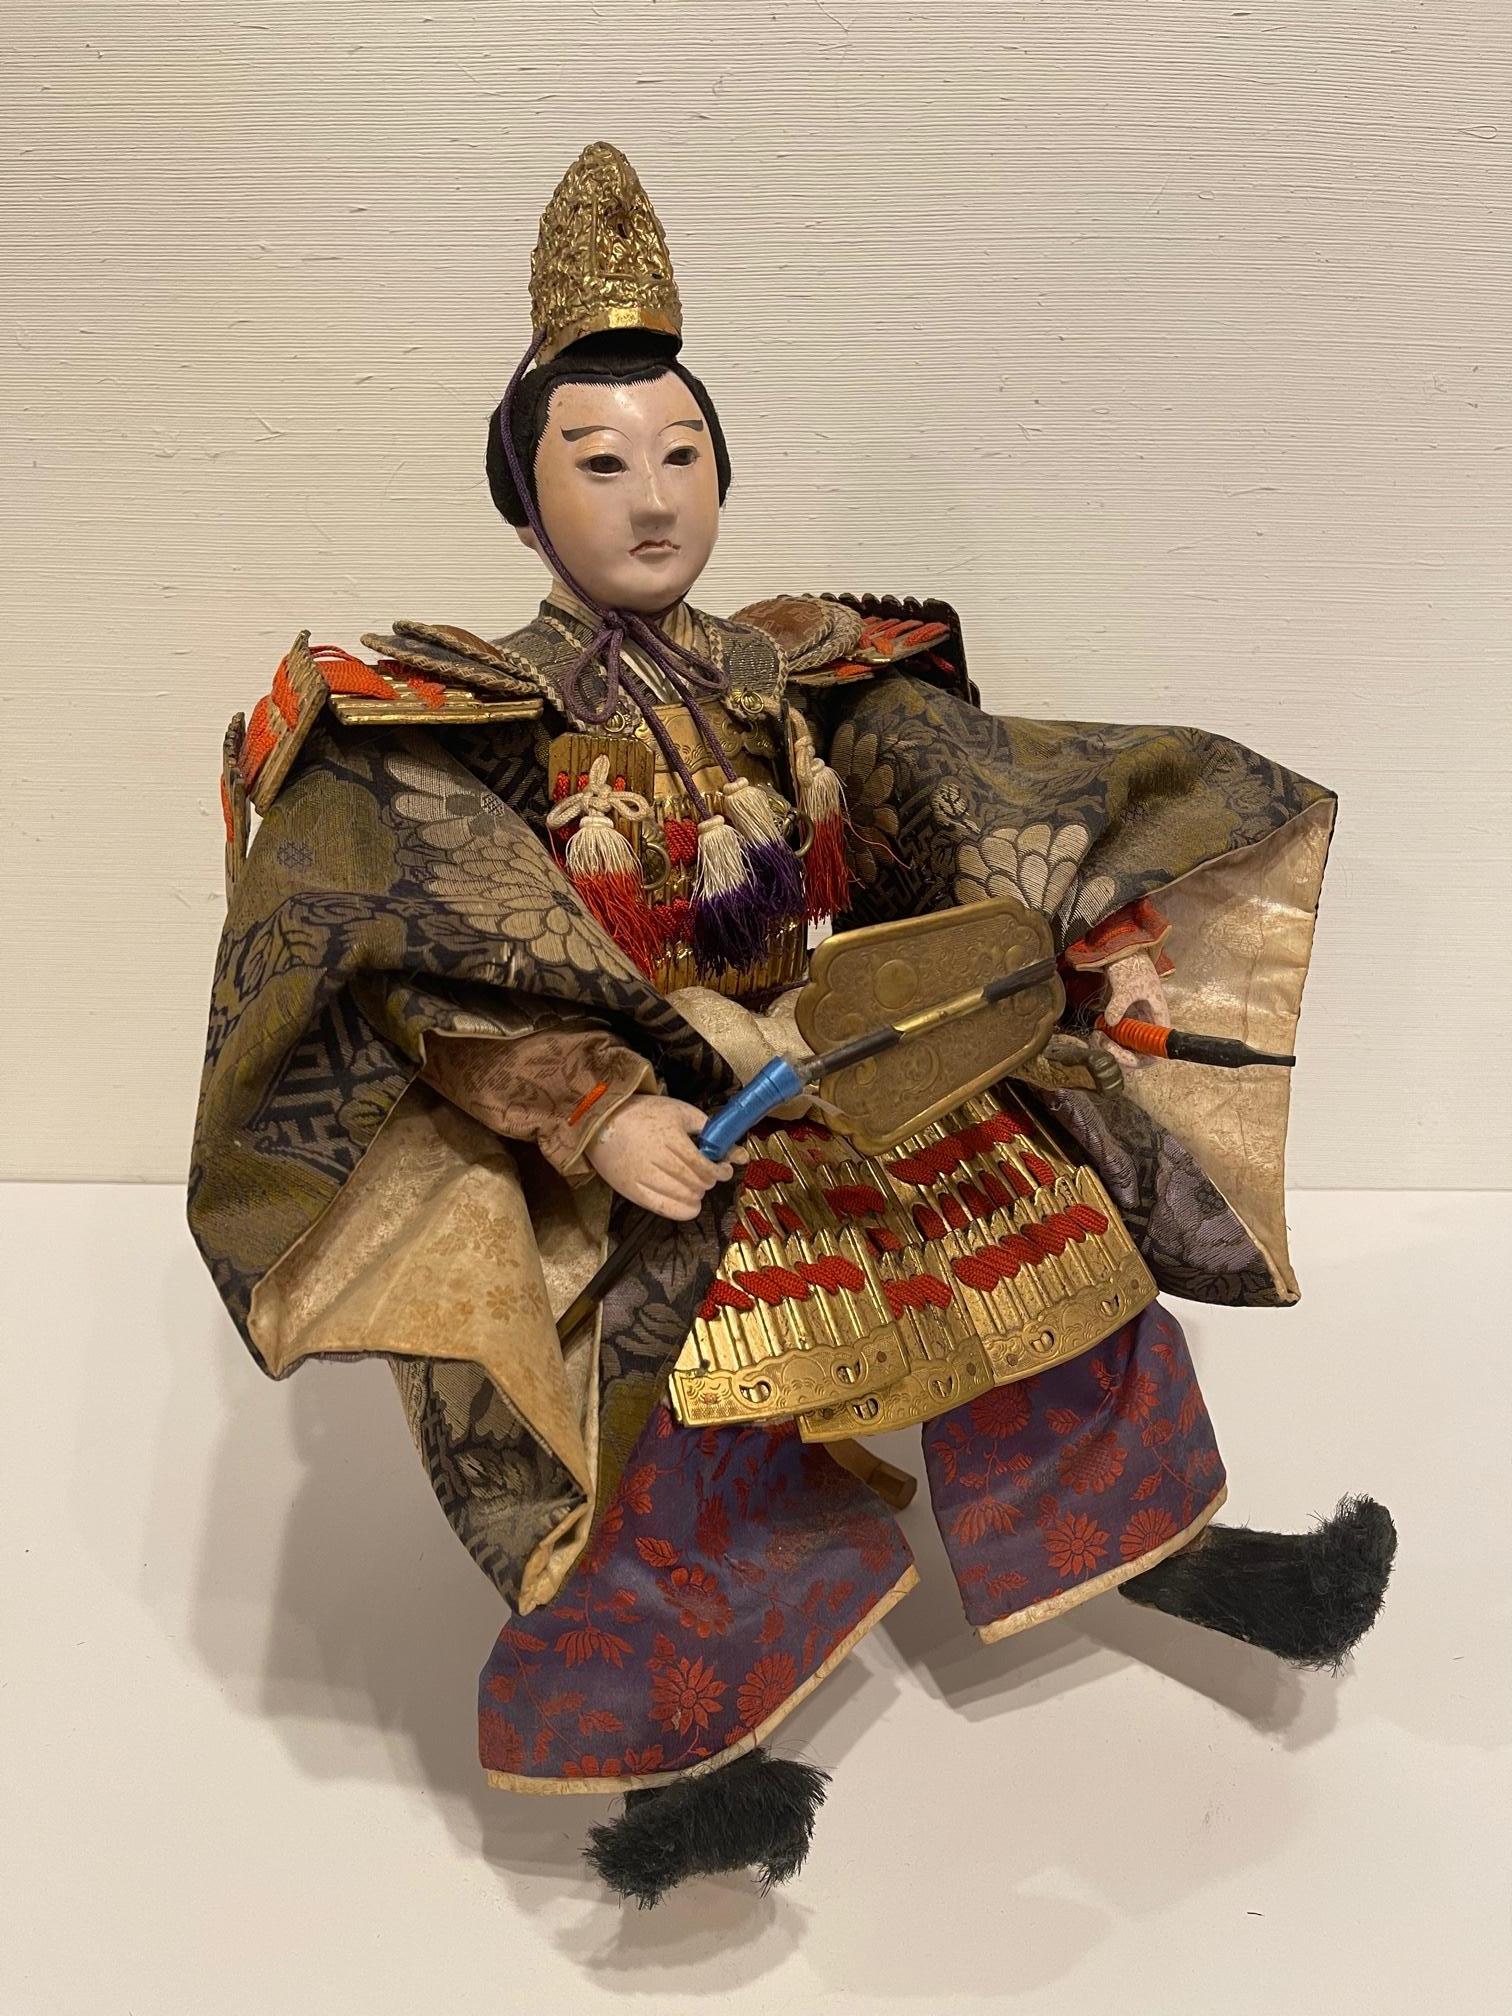 Japanese Samurai Doll or Figure, Meiji Period, circa 1830. Skirt purple and red colors.
 